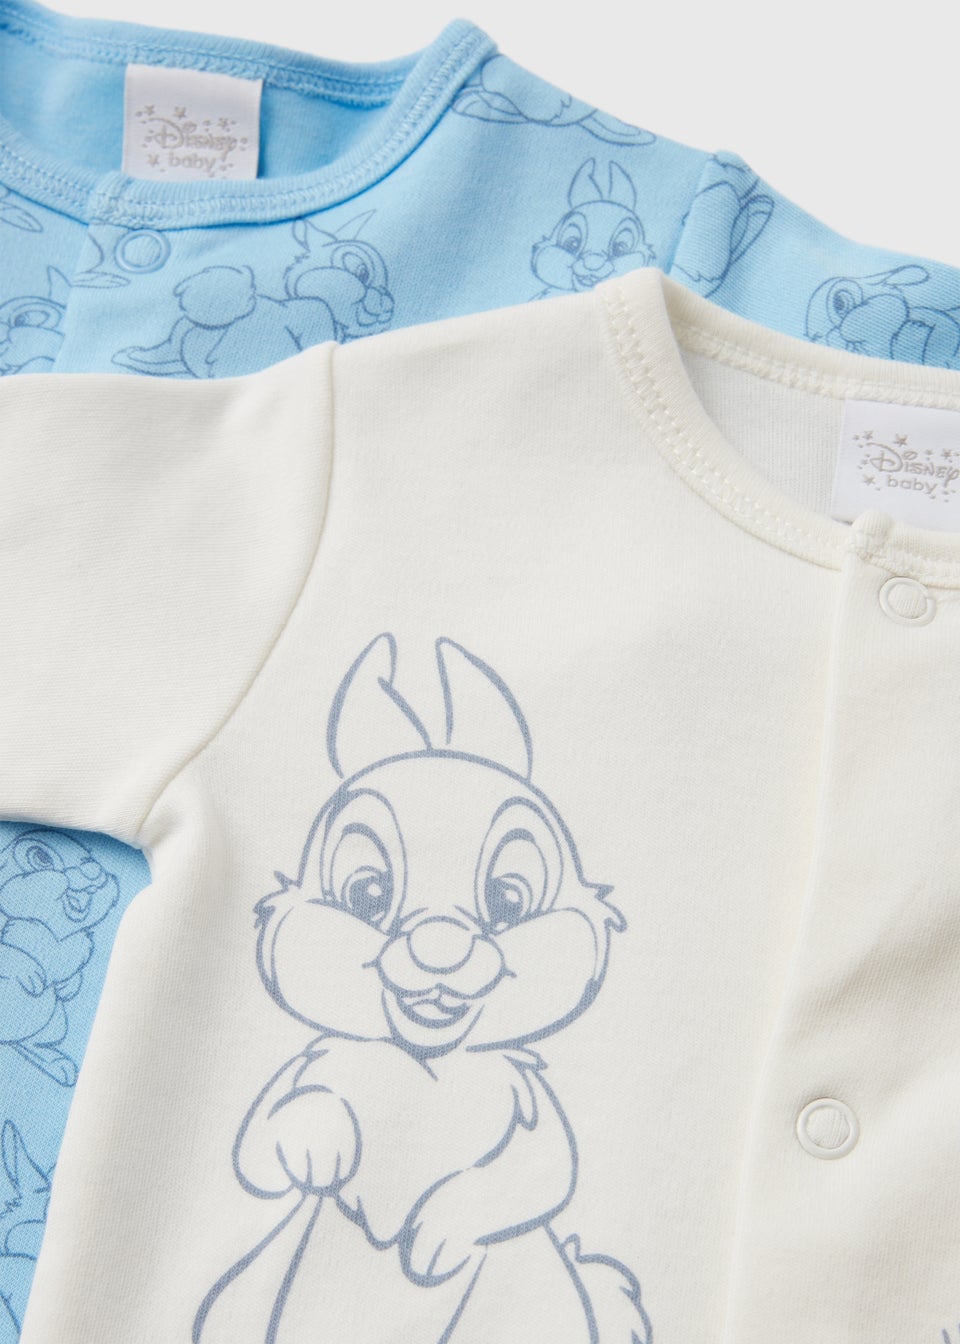 Disney Baby 2 Pack Blue Thumper Sleepsuit (Tiny Baby-18mths)